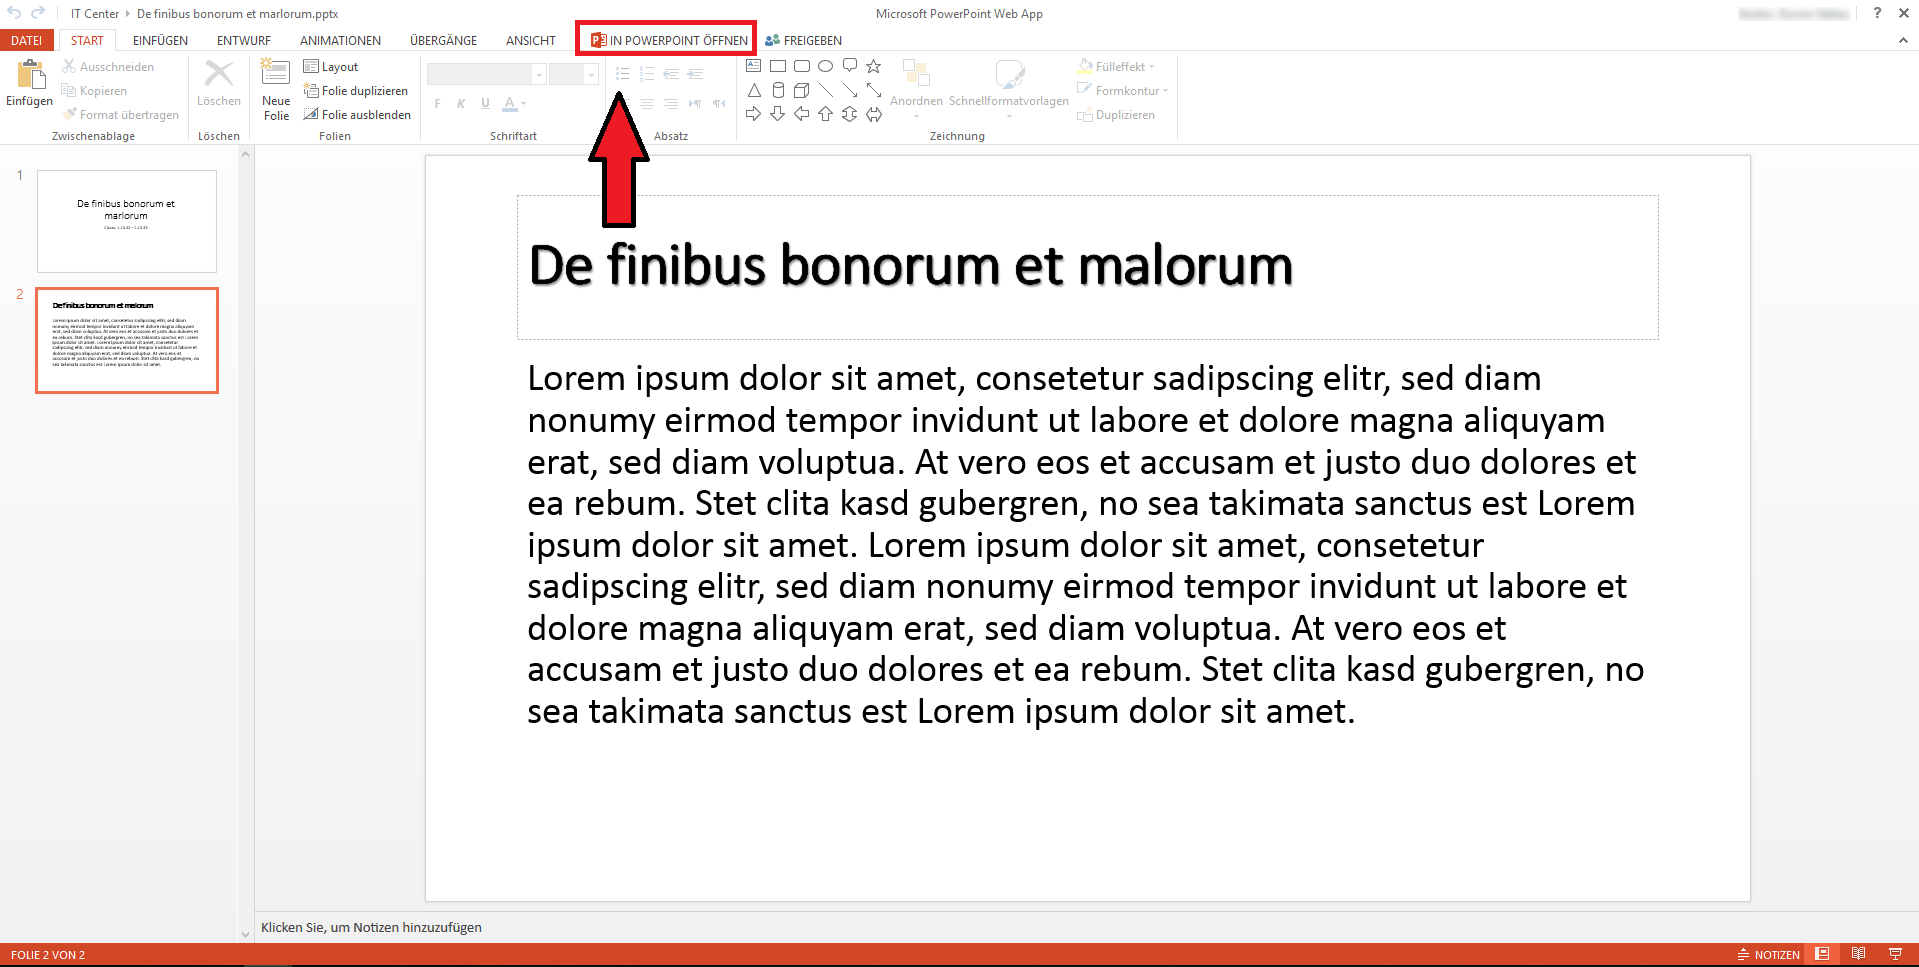 PowerPoint Web App editing-view